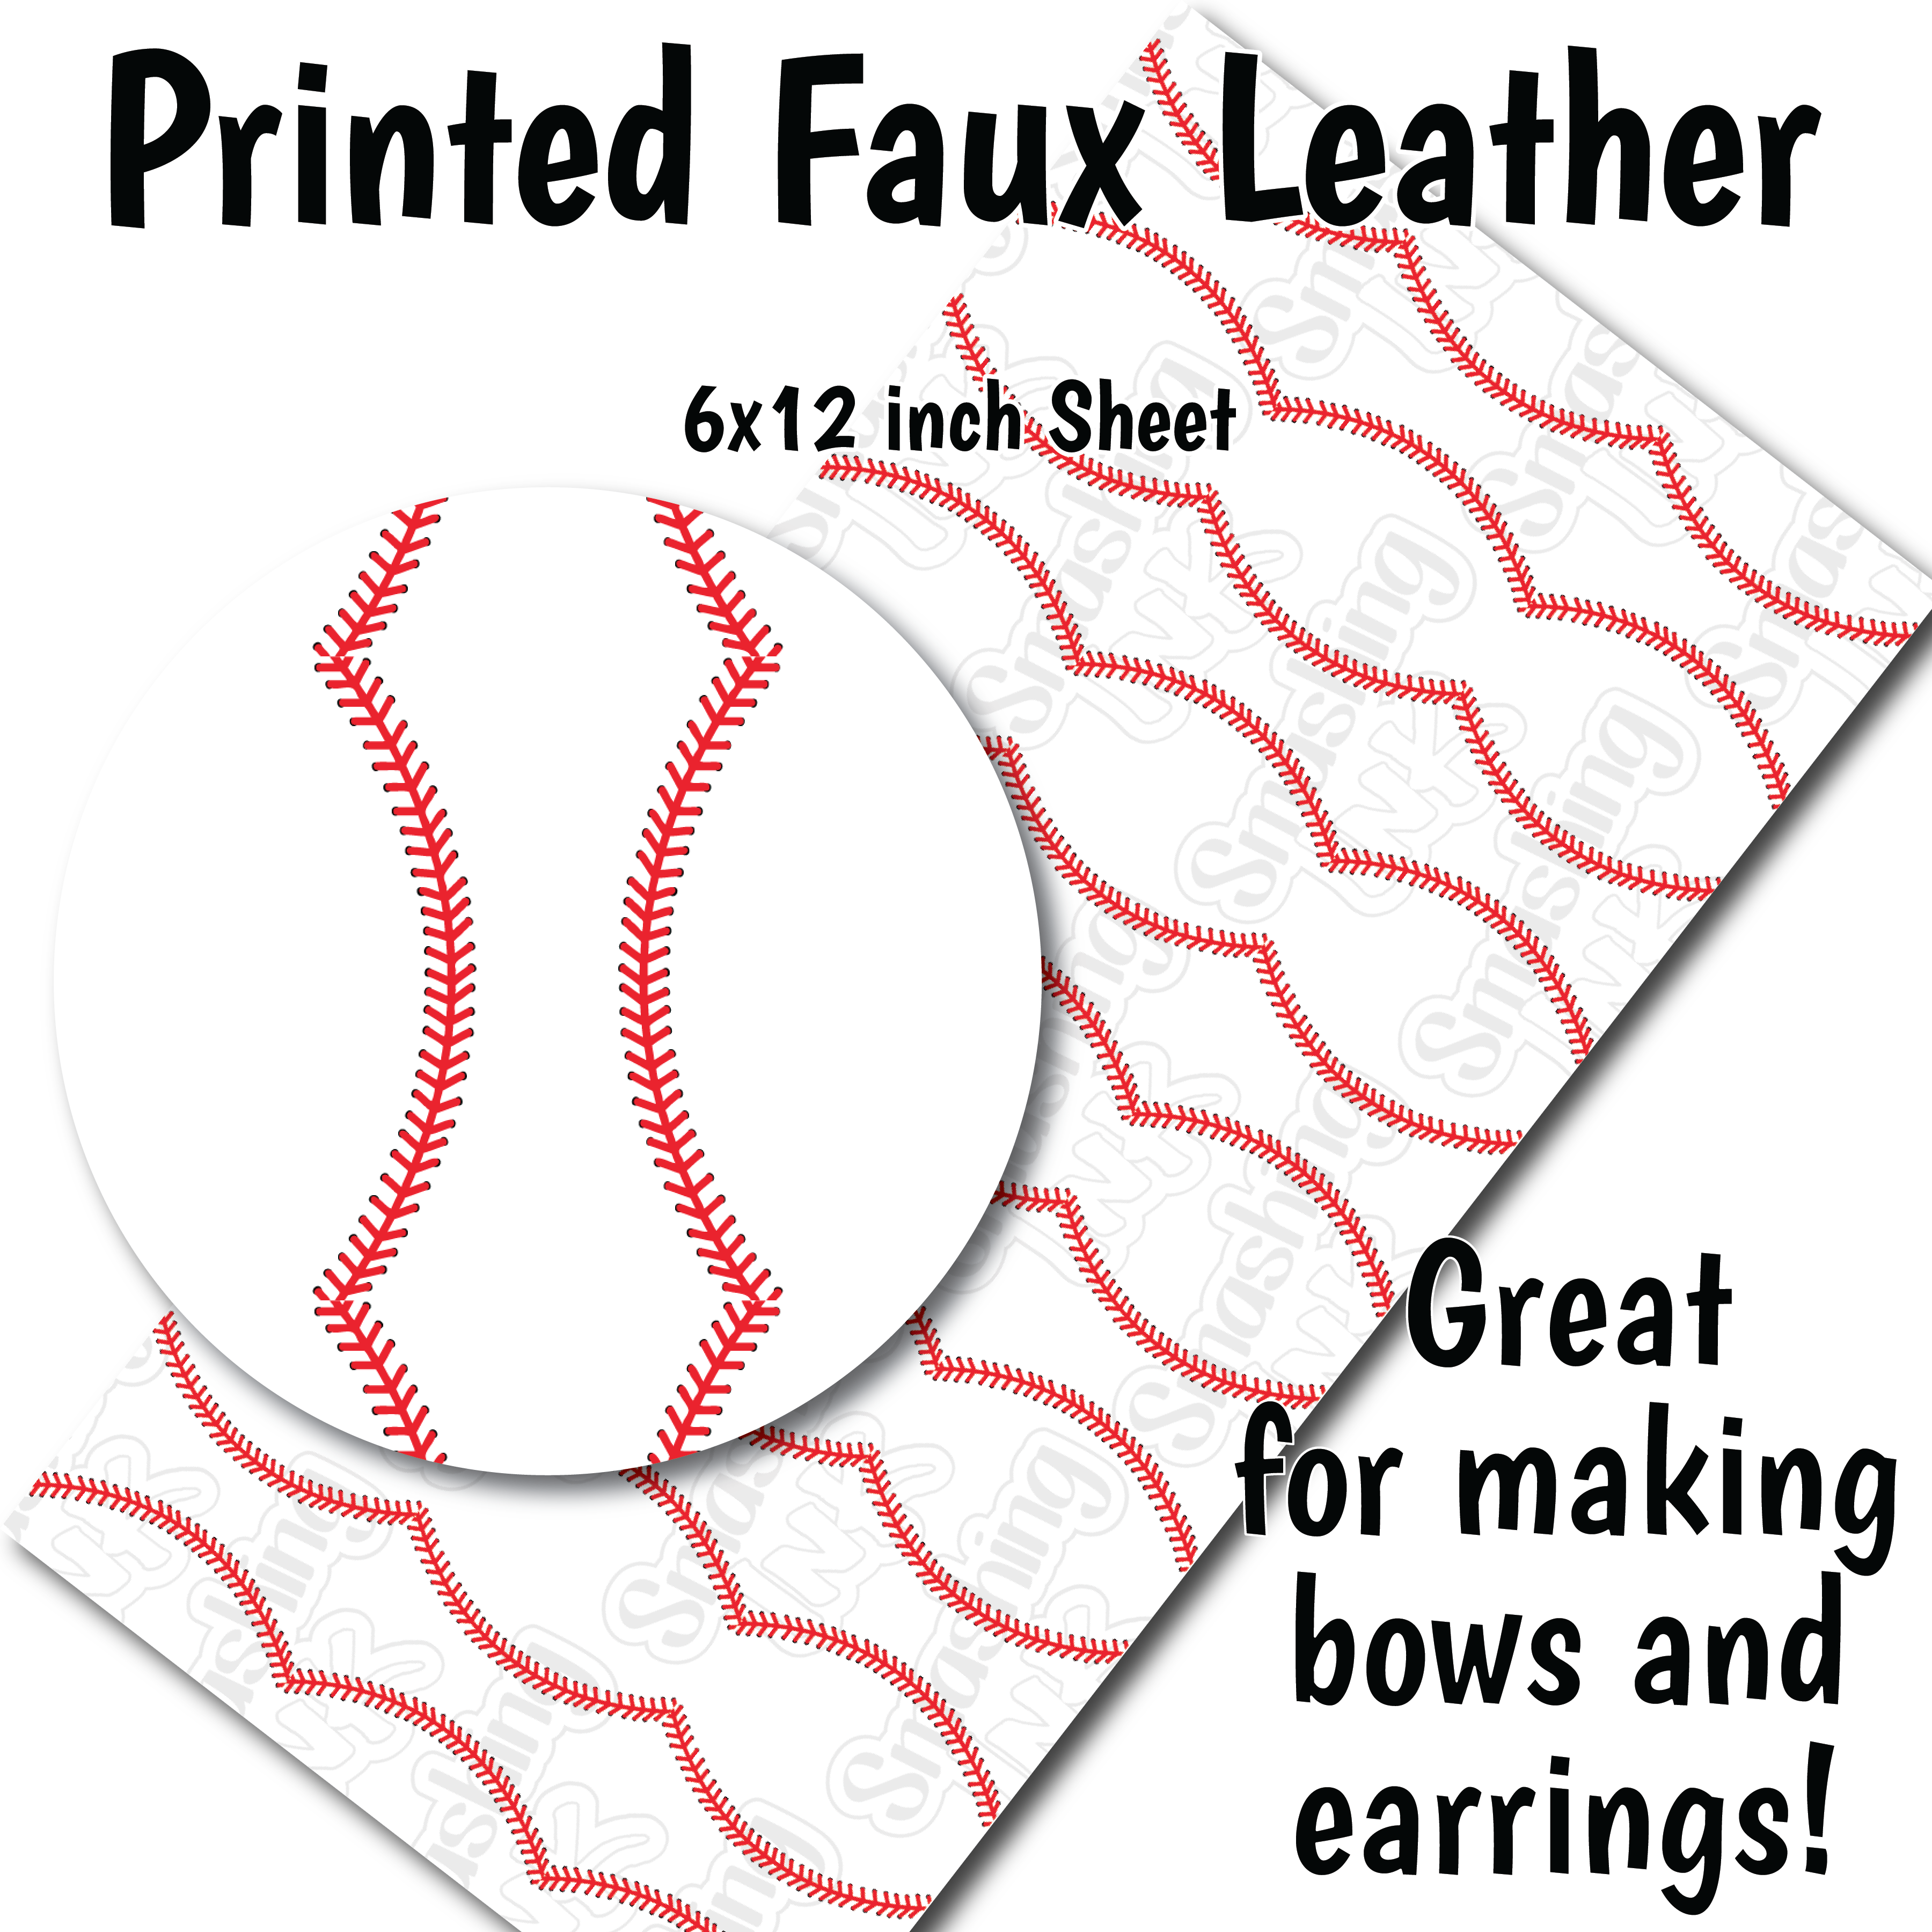 Plaid Faux Leather Sheets for Earring Making and Crafts, Canvas